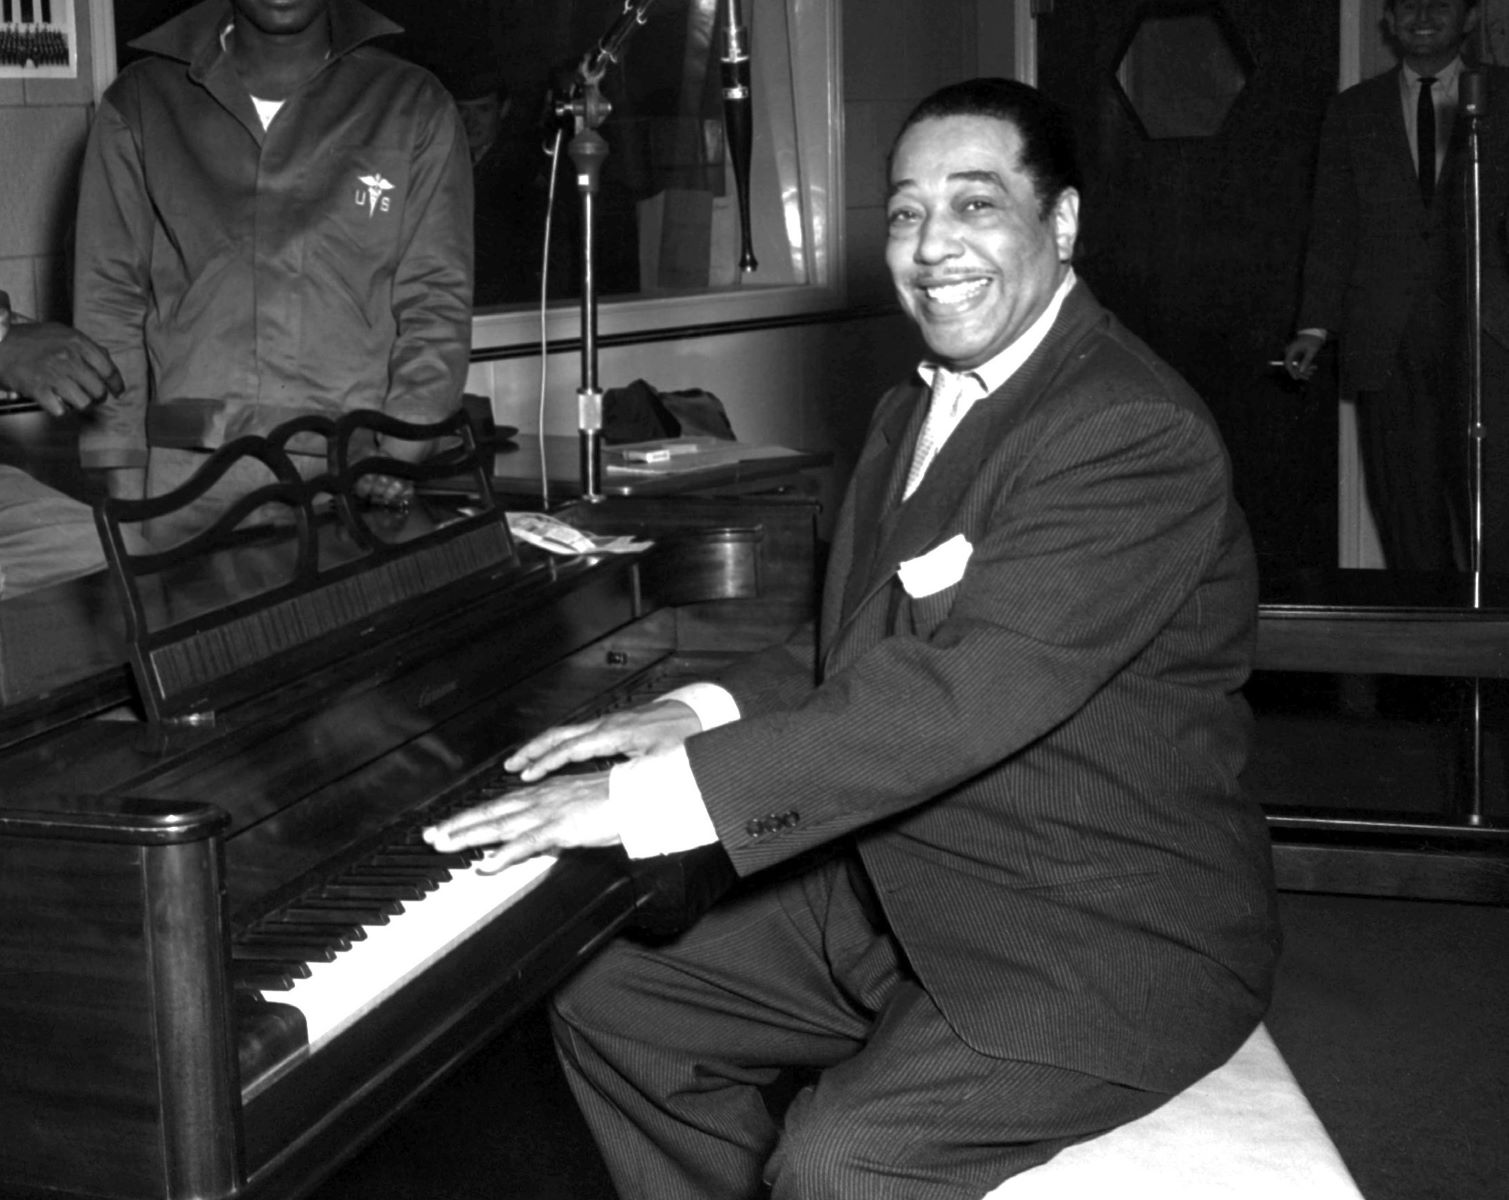 Who Was A Popular Pianist And Composer And Was Founder Of The “Big Band” Sound In Jazz?